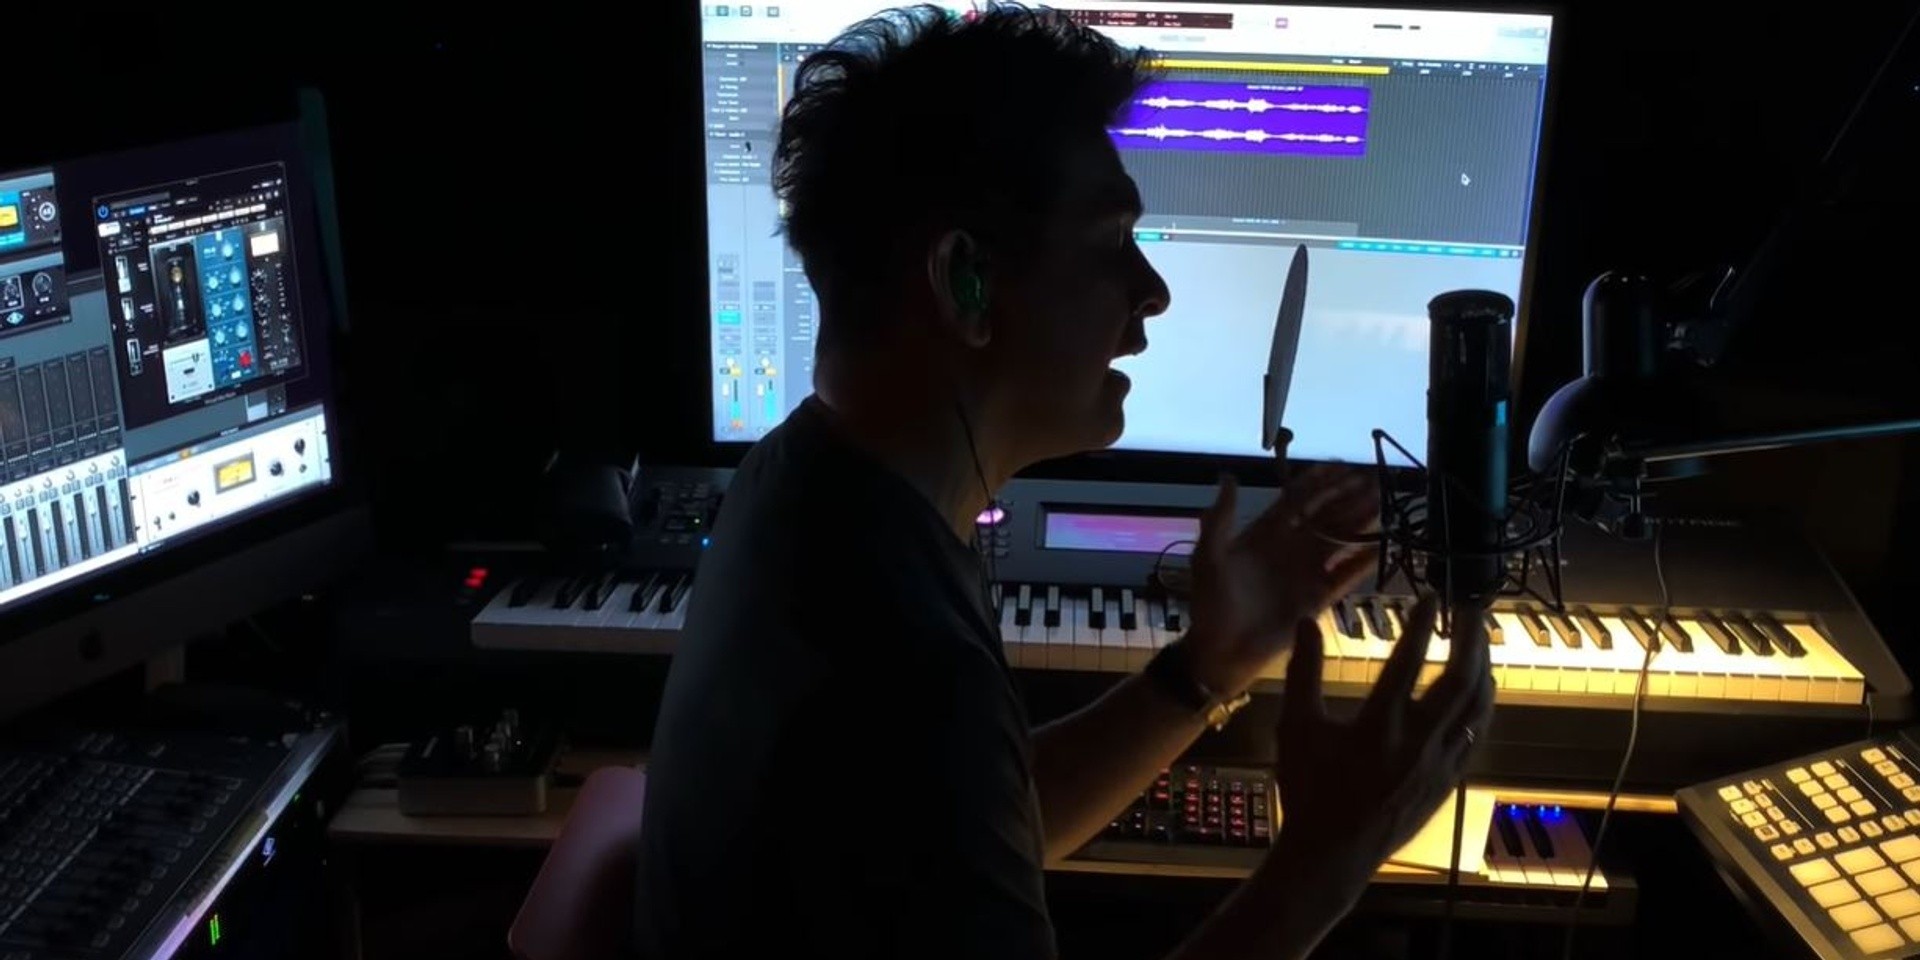 Gary Valenciano shares 'Take Me Out of the Dark' performance video from home studio – watch